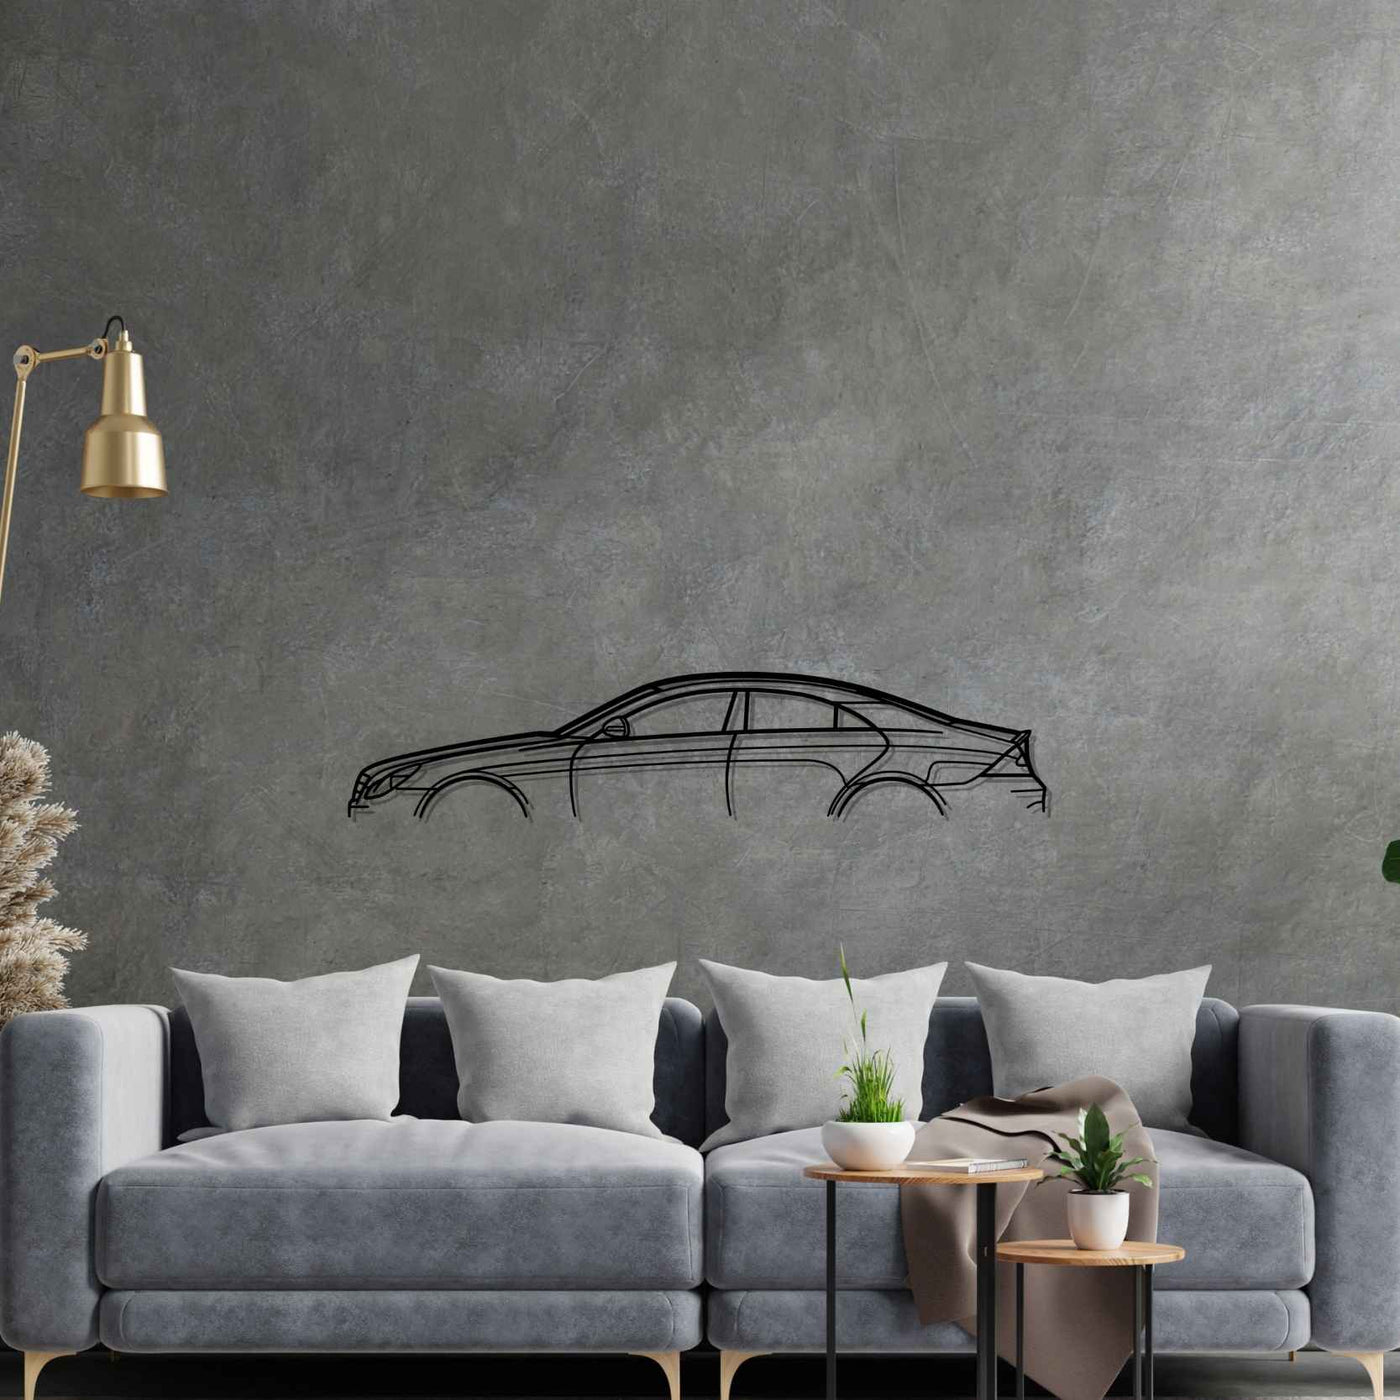 CLS55 W219 Classic Silhouette Metal Wall Art